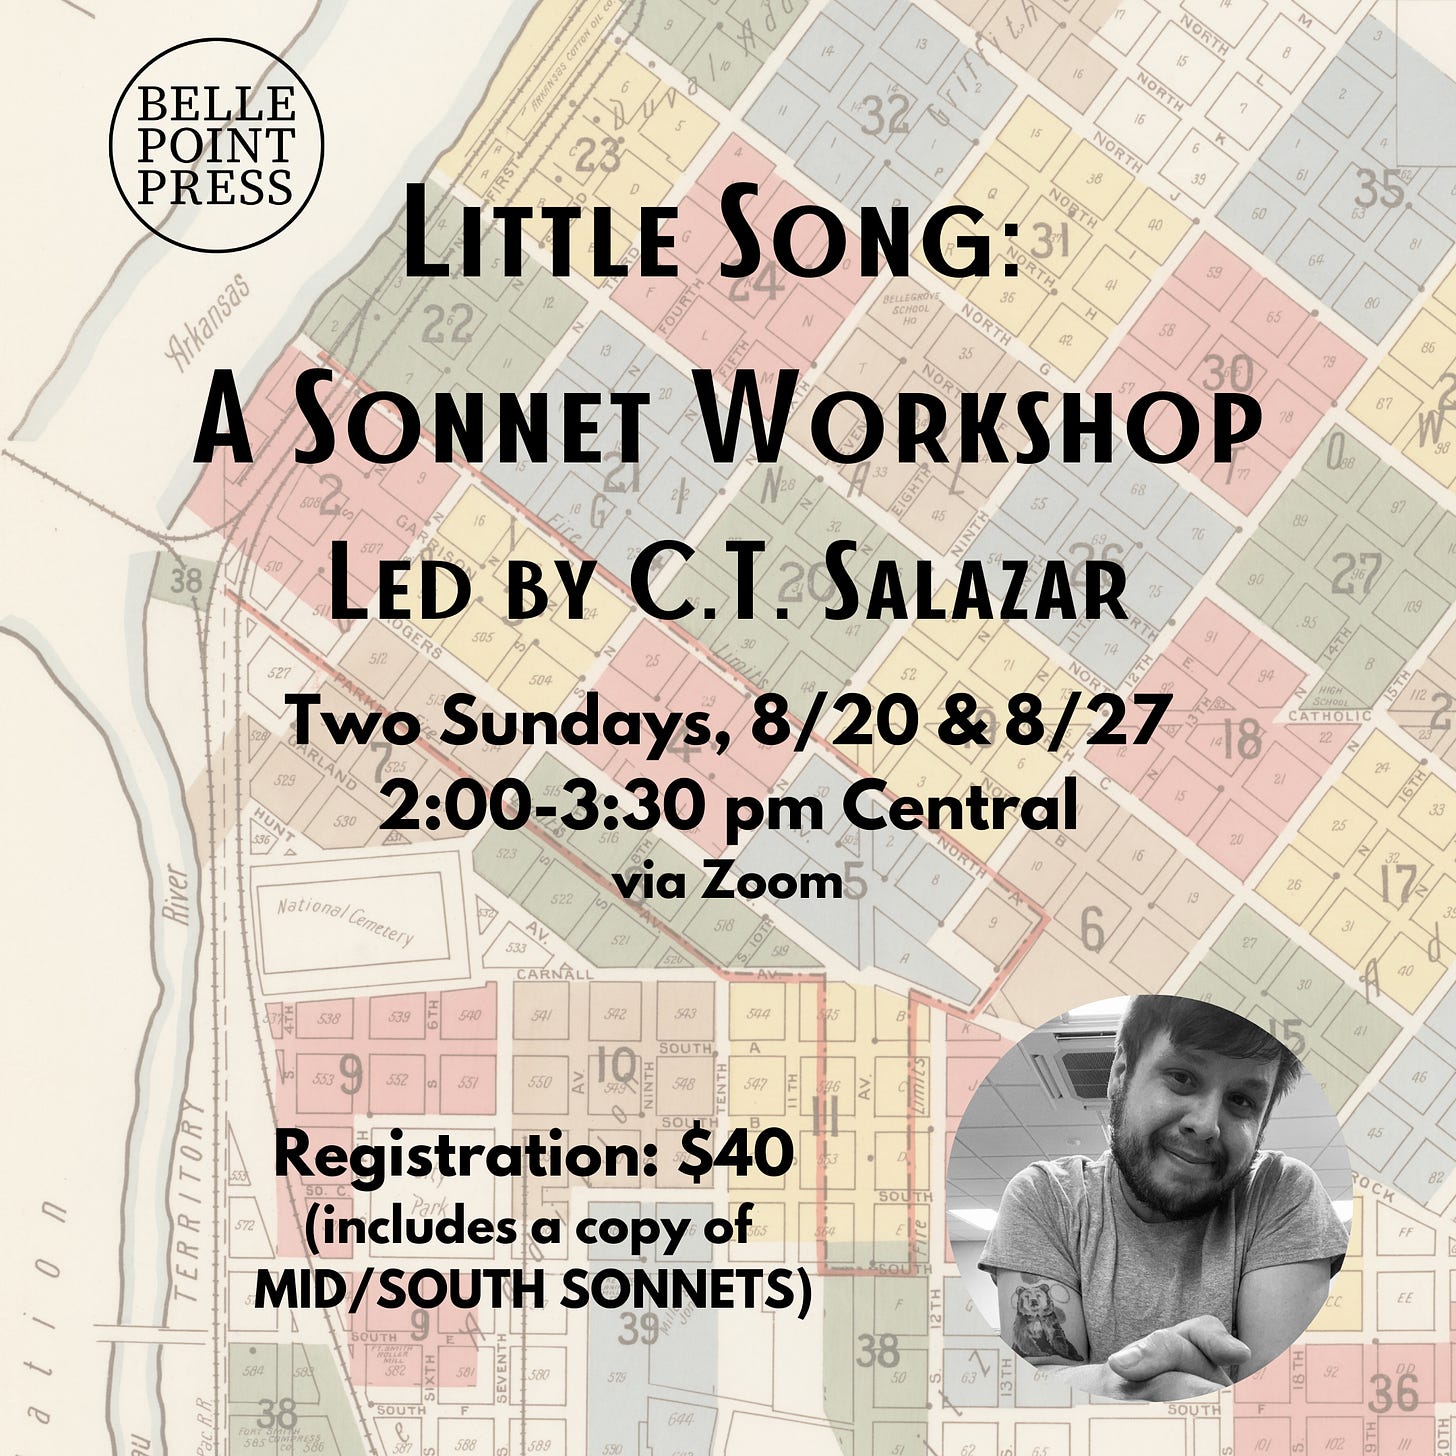 Little Song: A Sonnet Workshop led by C.T. Salazar. Two Sundays, 8/20 & 8/27, 2:00-3:30pm Central via Zoom. Registration: $40 (includes a copy of Mid/South Sonnets)